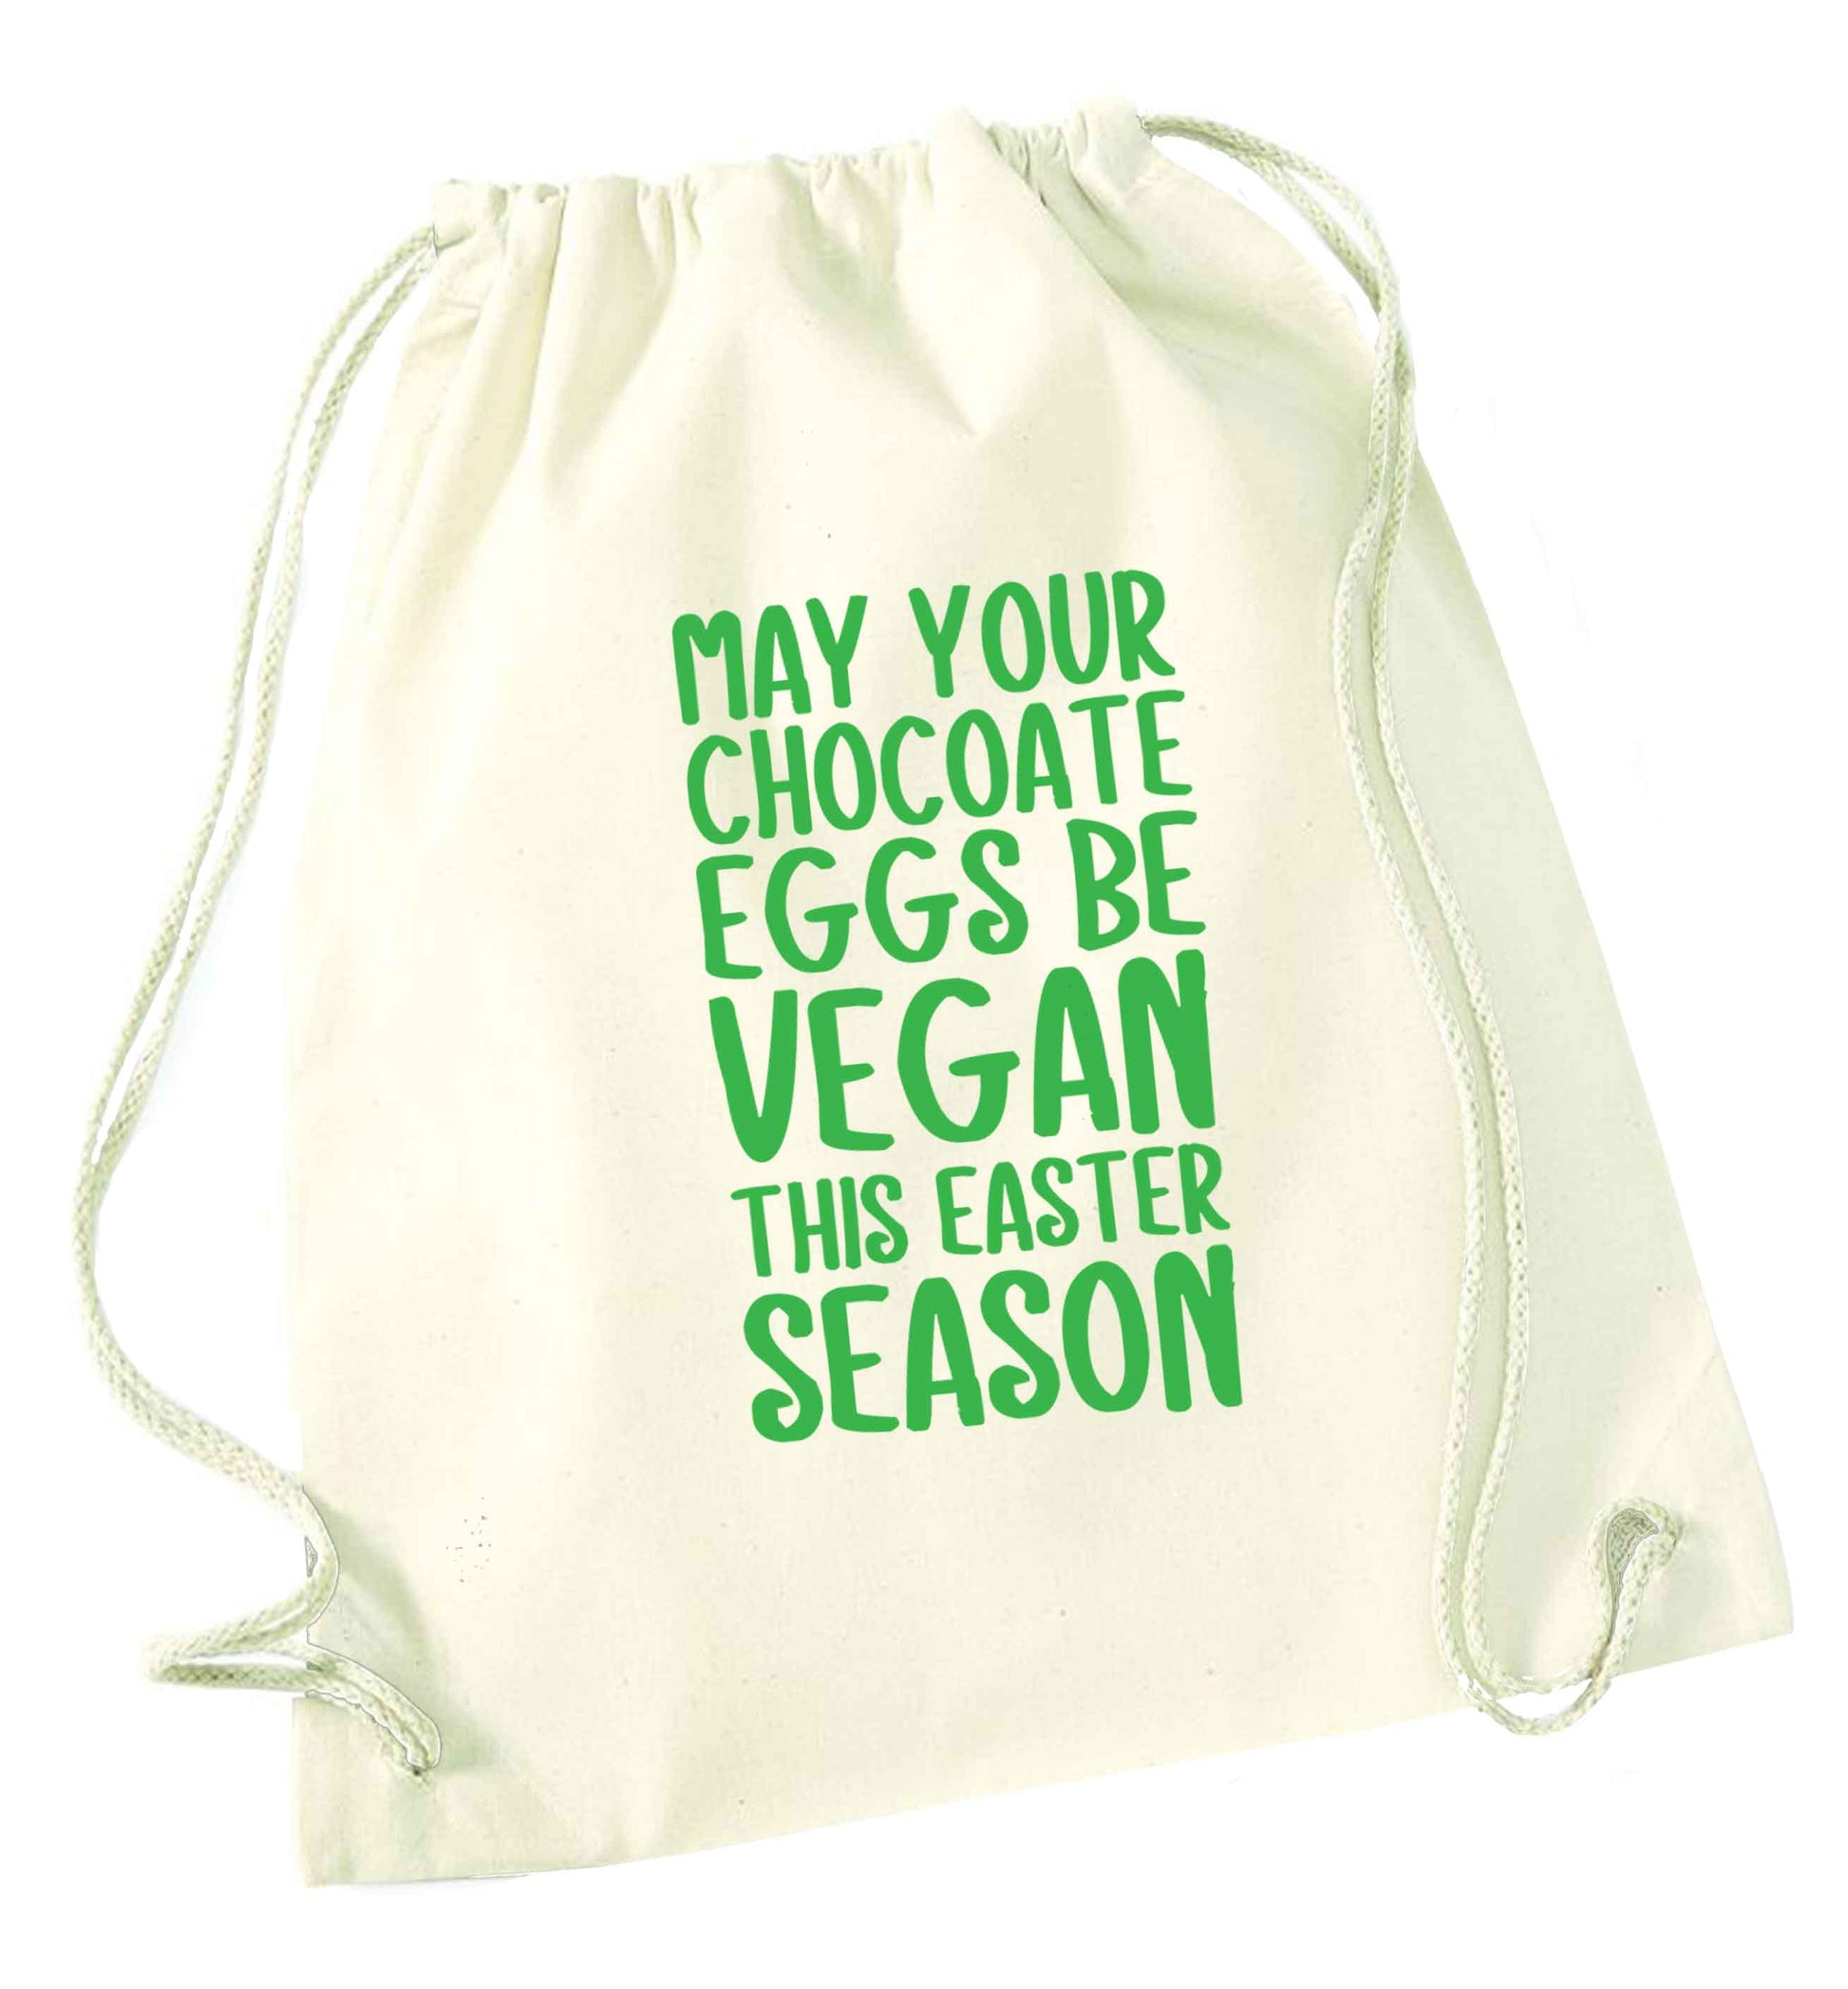 Easter bunny approved! Vegans will love this easter themed natural drawstring bag